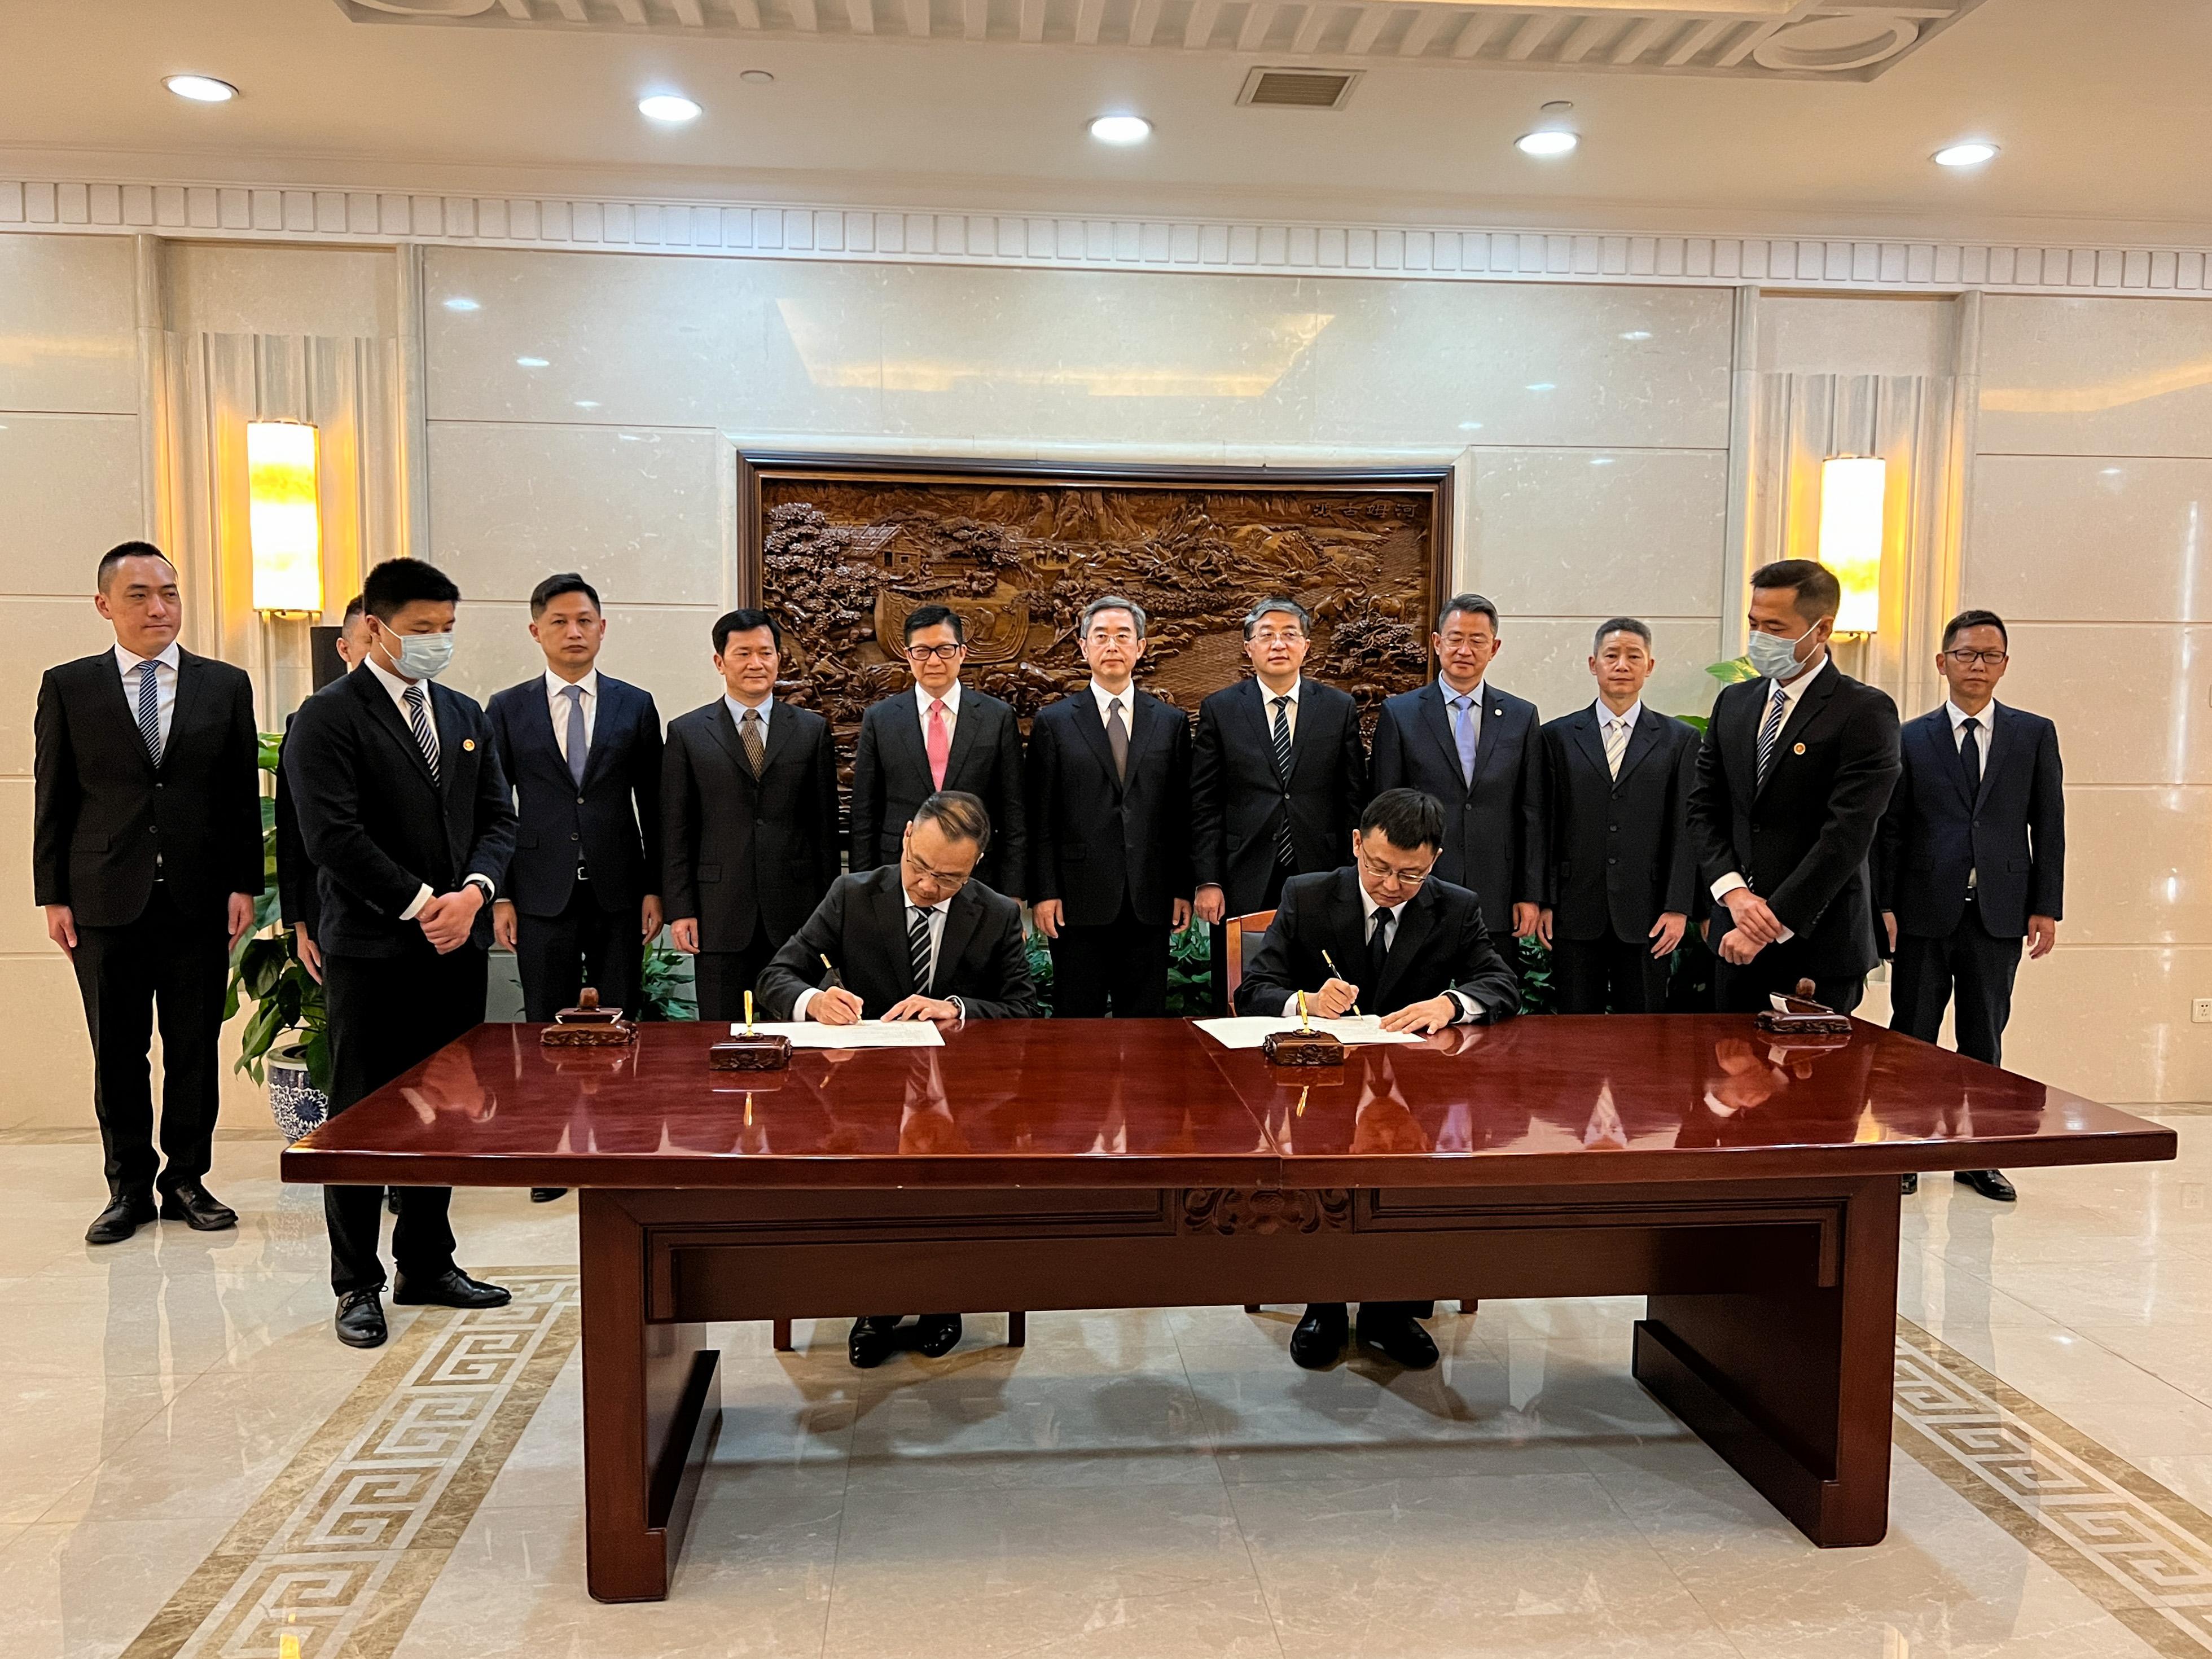 The Secretary for Security, Mr Tang Ping-keung (back row, fifth left), continued the second day of his visit to Beijing today (April 25). Photo shows the Controller of the Government Flying Service, Captain West Wu (front row, second left), signing the Letter of Intent for a Five-Year Plan on Technical Co-operation with the Director General of the Rescue and Salvage Bureau of the Ministry of Transport, Mr Wang Lei (front row, second right). The signing of the Letter of Intent is set to strengthen technical co-operation and the exchange of rescue experiences to enhance professional standards of both sides.